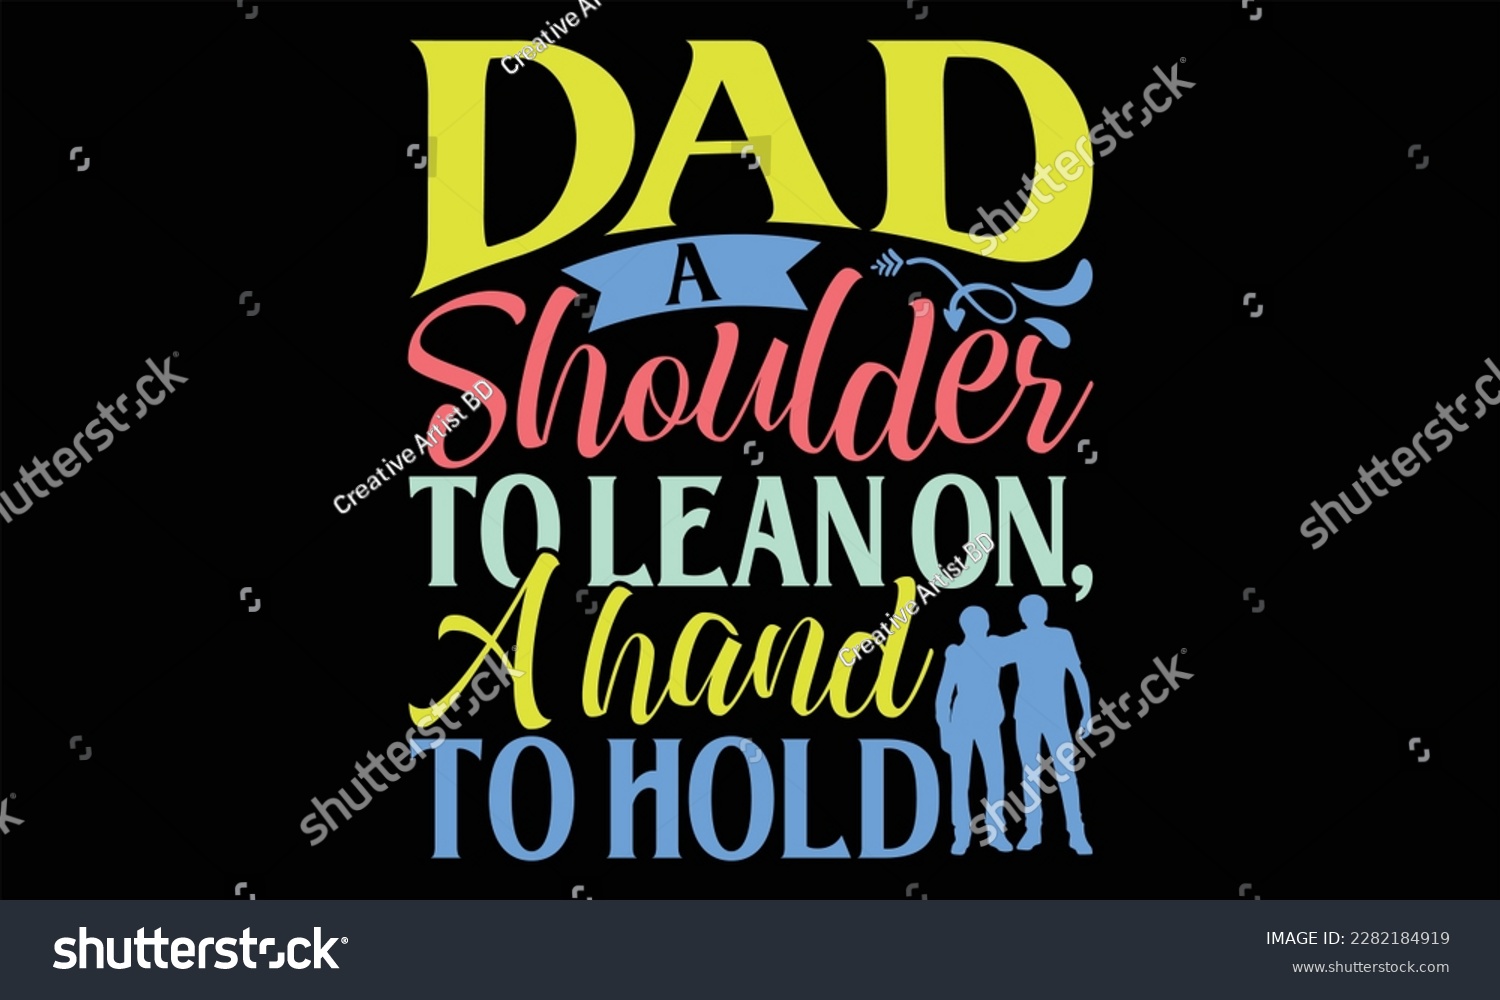 SVG of Dad A Shoulder to Lean On, A Hand to Hold - Father's Day SVG Design, Hand lettering inspirational quotes isolated on black background, used for prints on bags, poster, banner, flyer and mug, pillows. svg